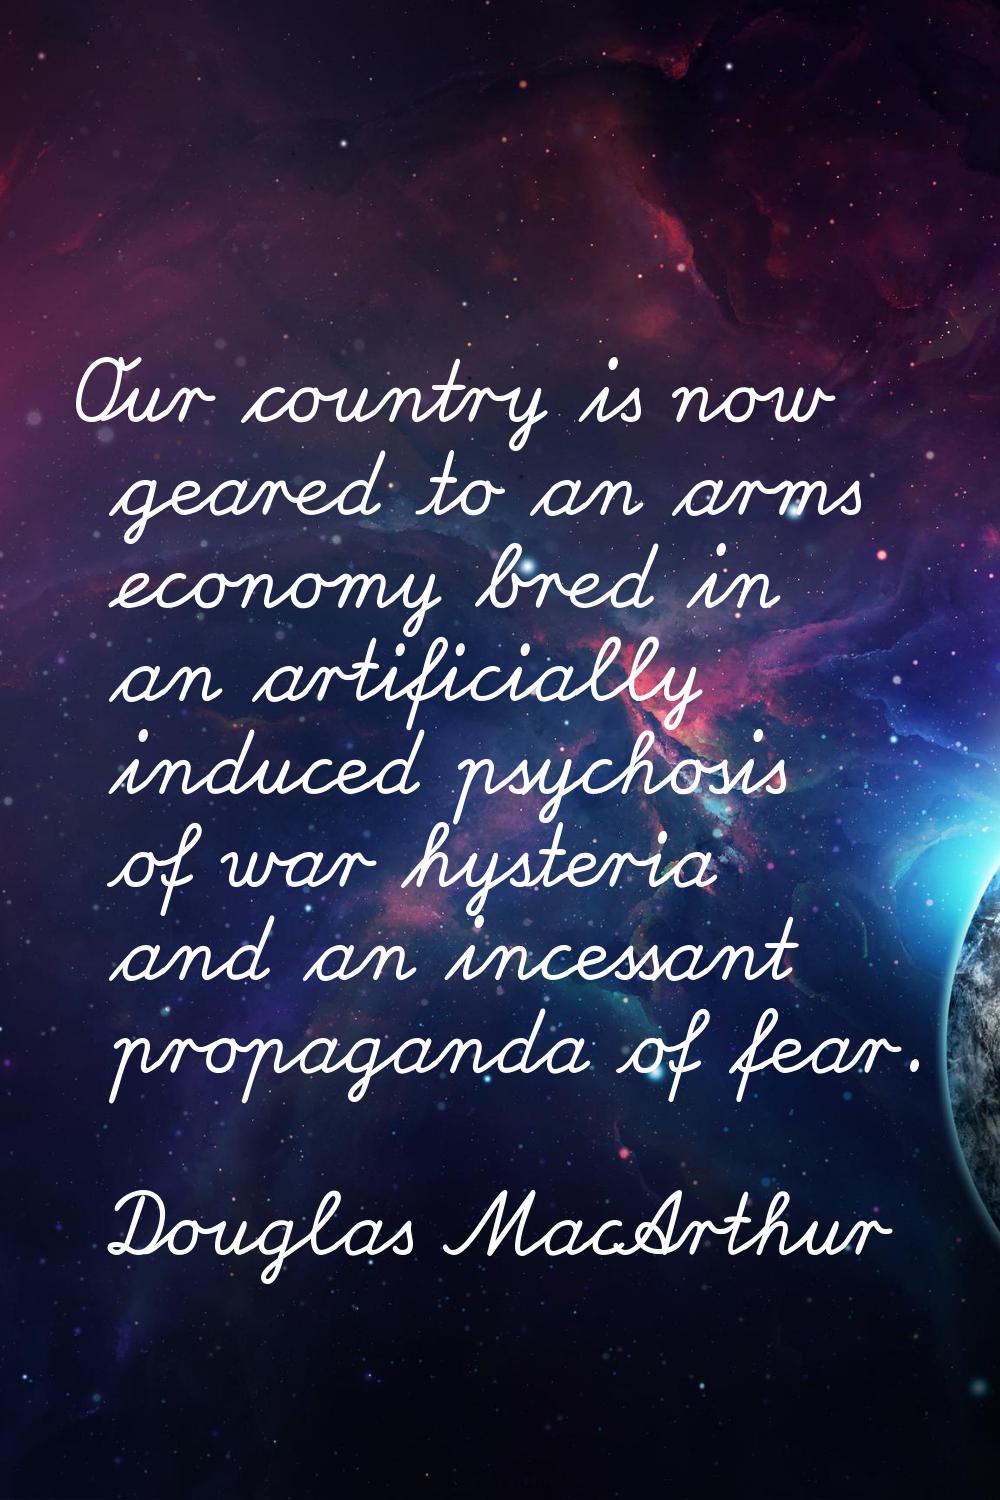 Our country is now geared to an arms economy bred in an artificially induced psychosis of war hyste